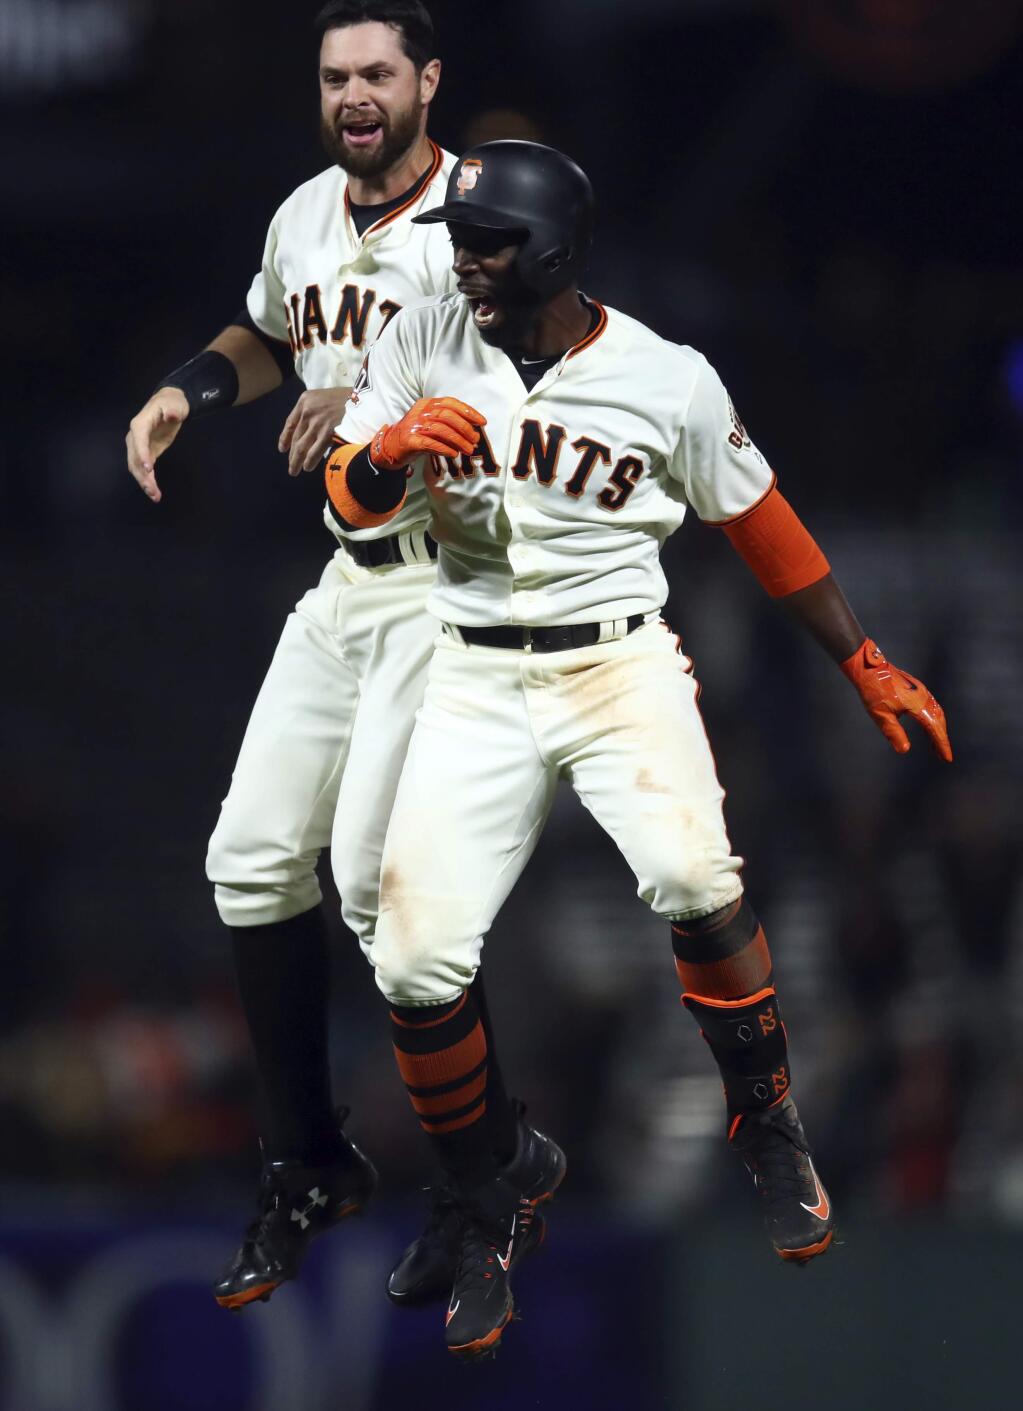 The San Francisco Giants' Andrew McCutchen, right, celebrates with Brandon Belt after his game-winning hit in the ninth inning against the Arizona Diamondbacks Tuesday, April 10, 2018, in San Francisco. (AP Photo/Ben Margot)